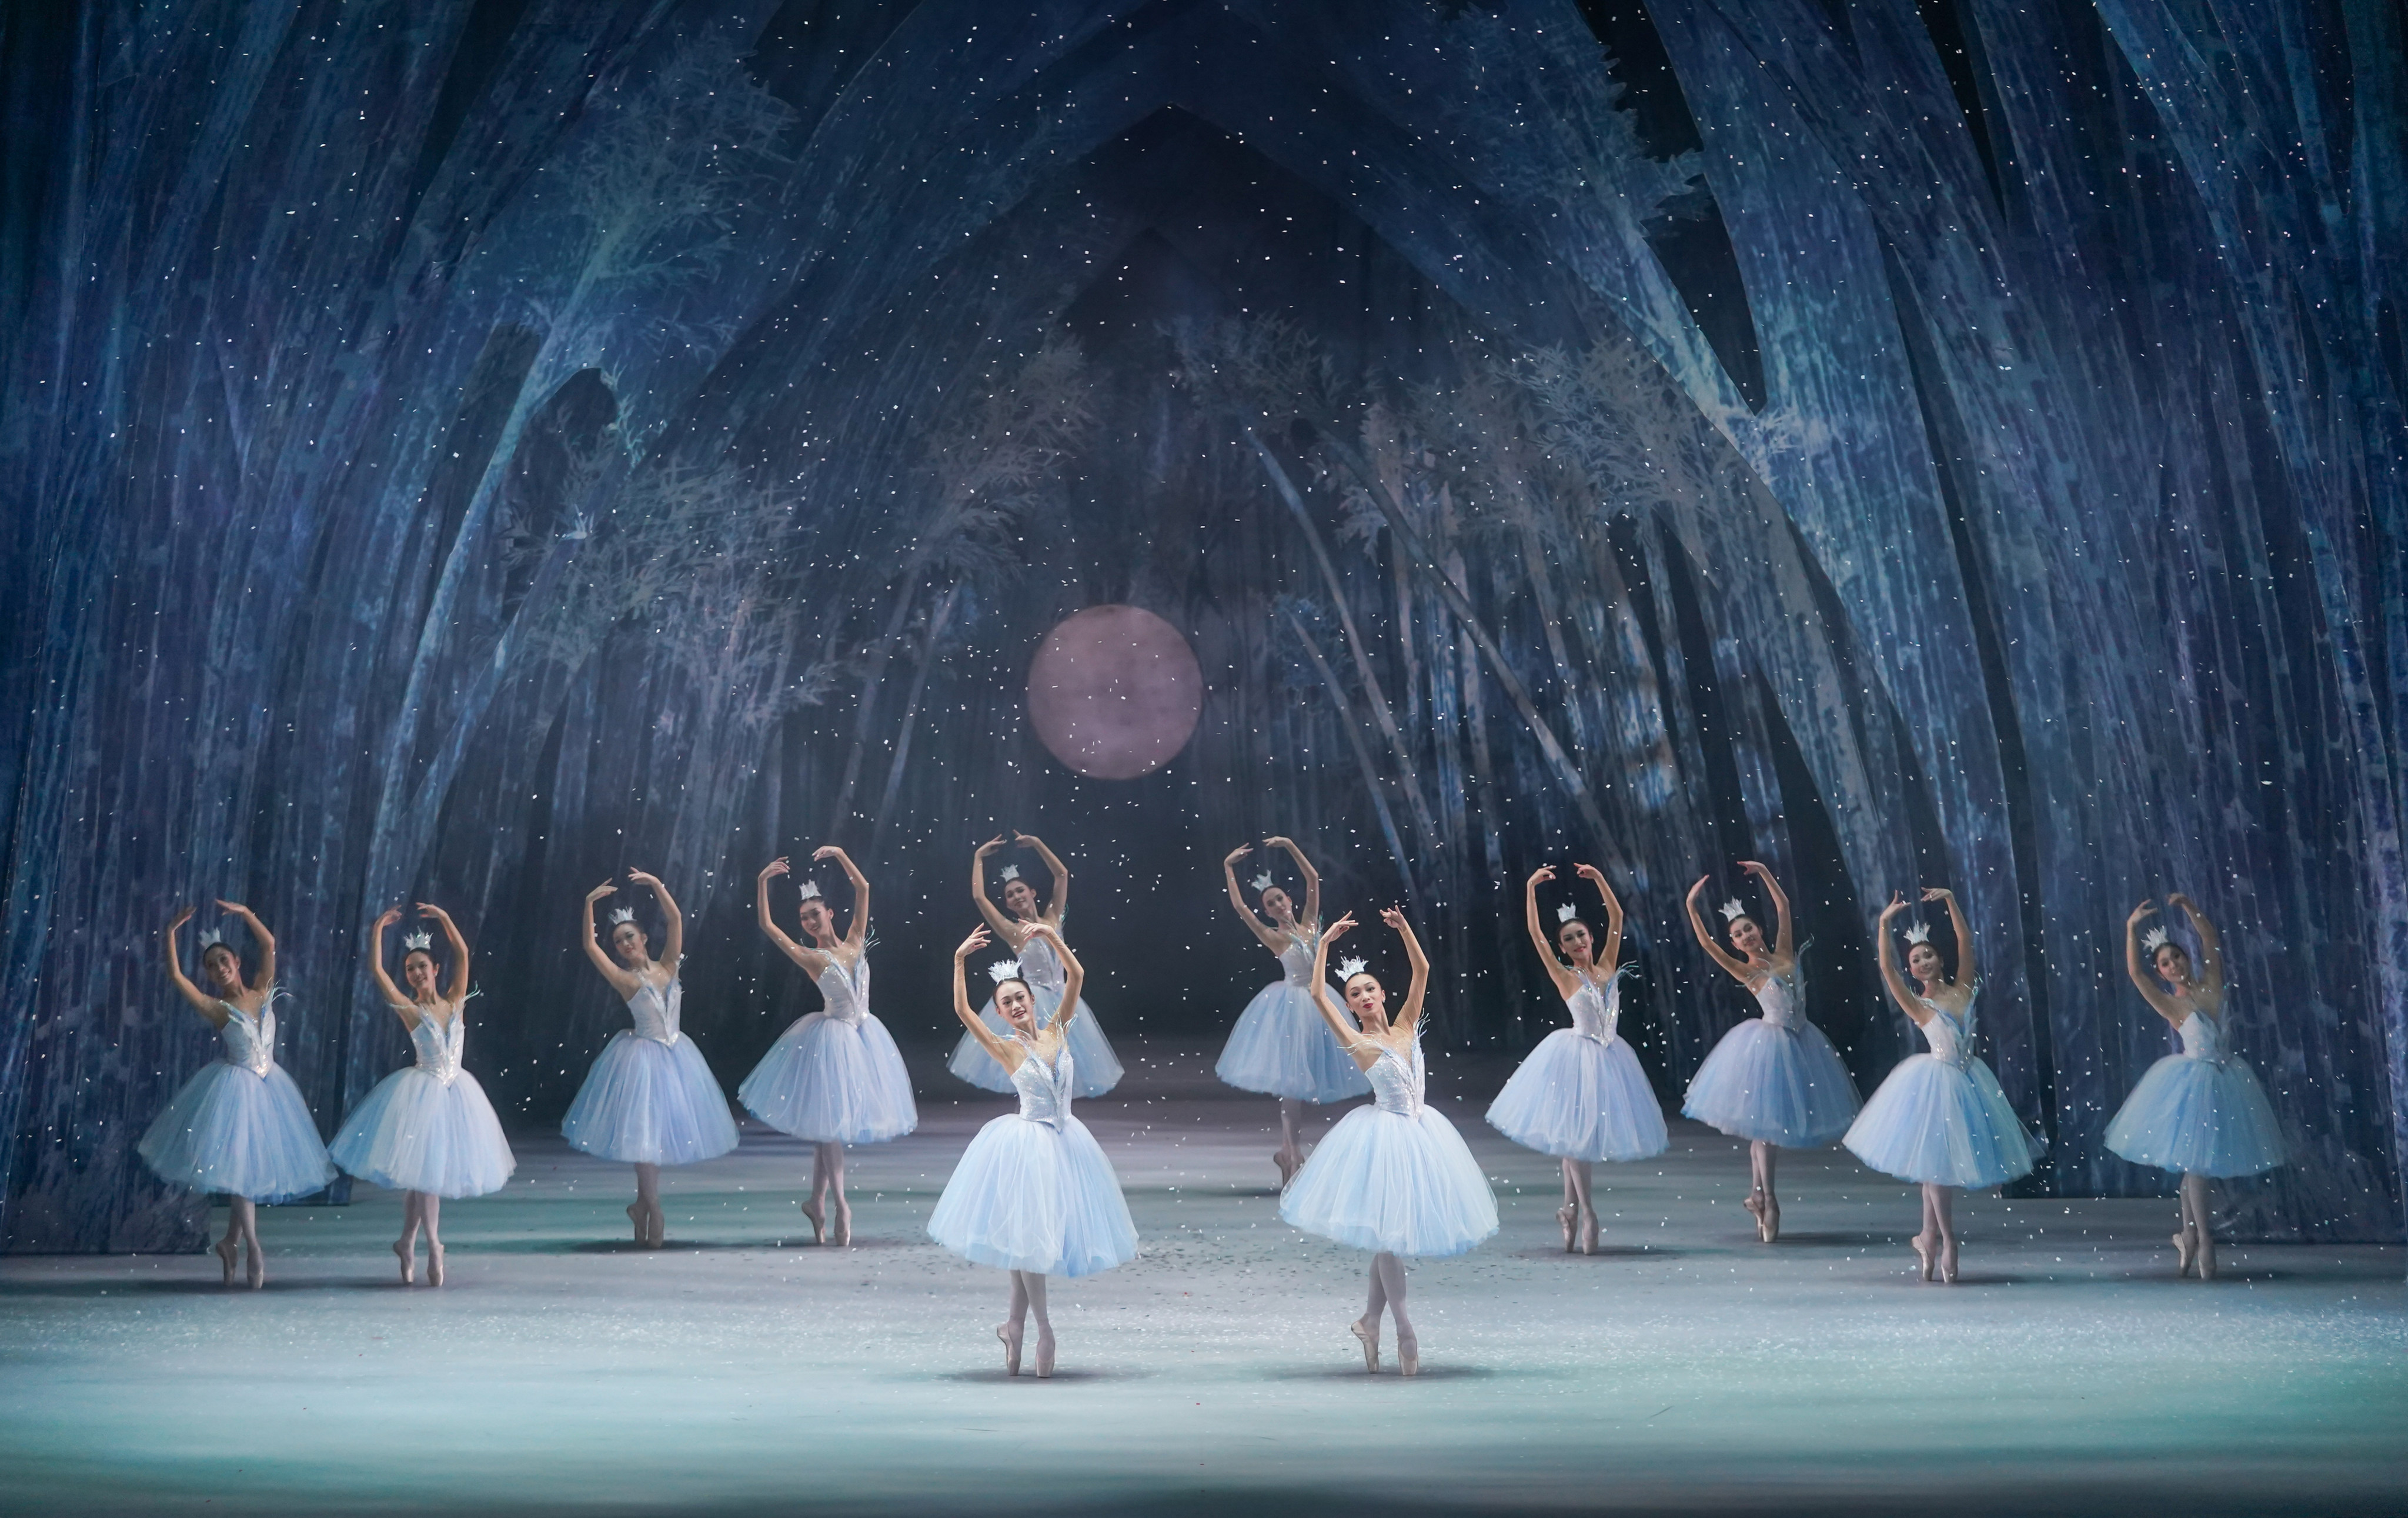 The season’s festive events in Hong Kong this year leave culture vultures spoiled for choice. Photo: Hong Kong Ballet